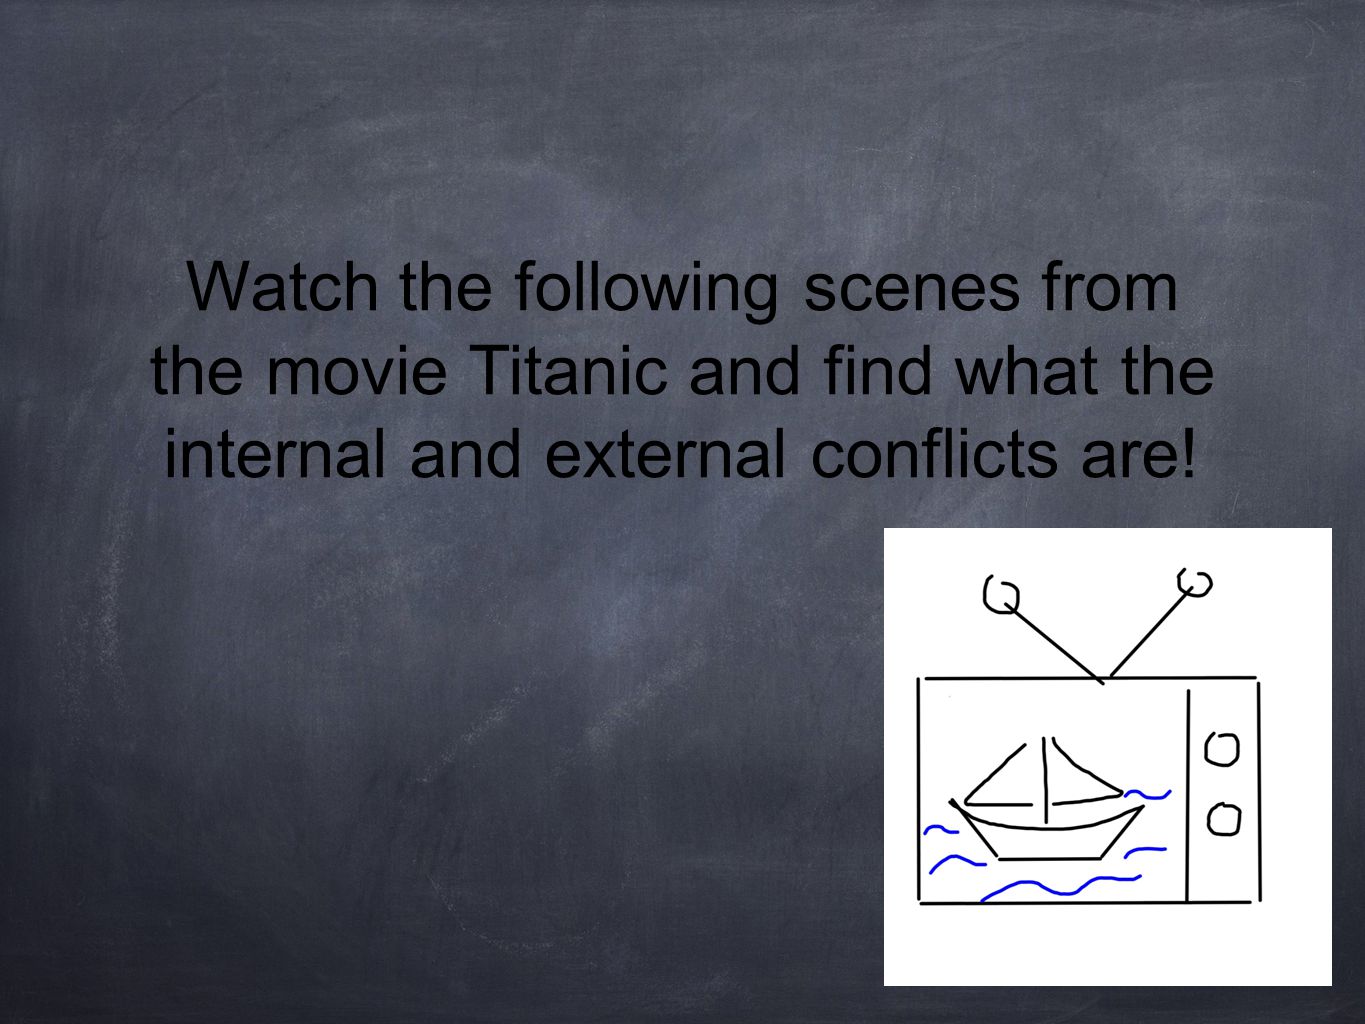 Watch the following scenes from the movie Titanic and find what the internal and external conflicts are!